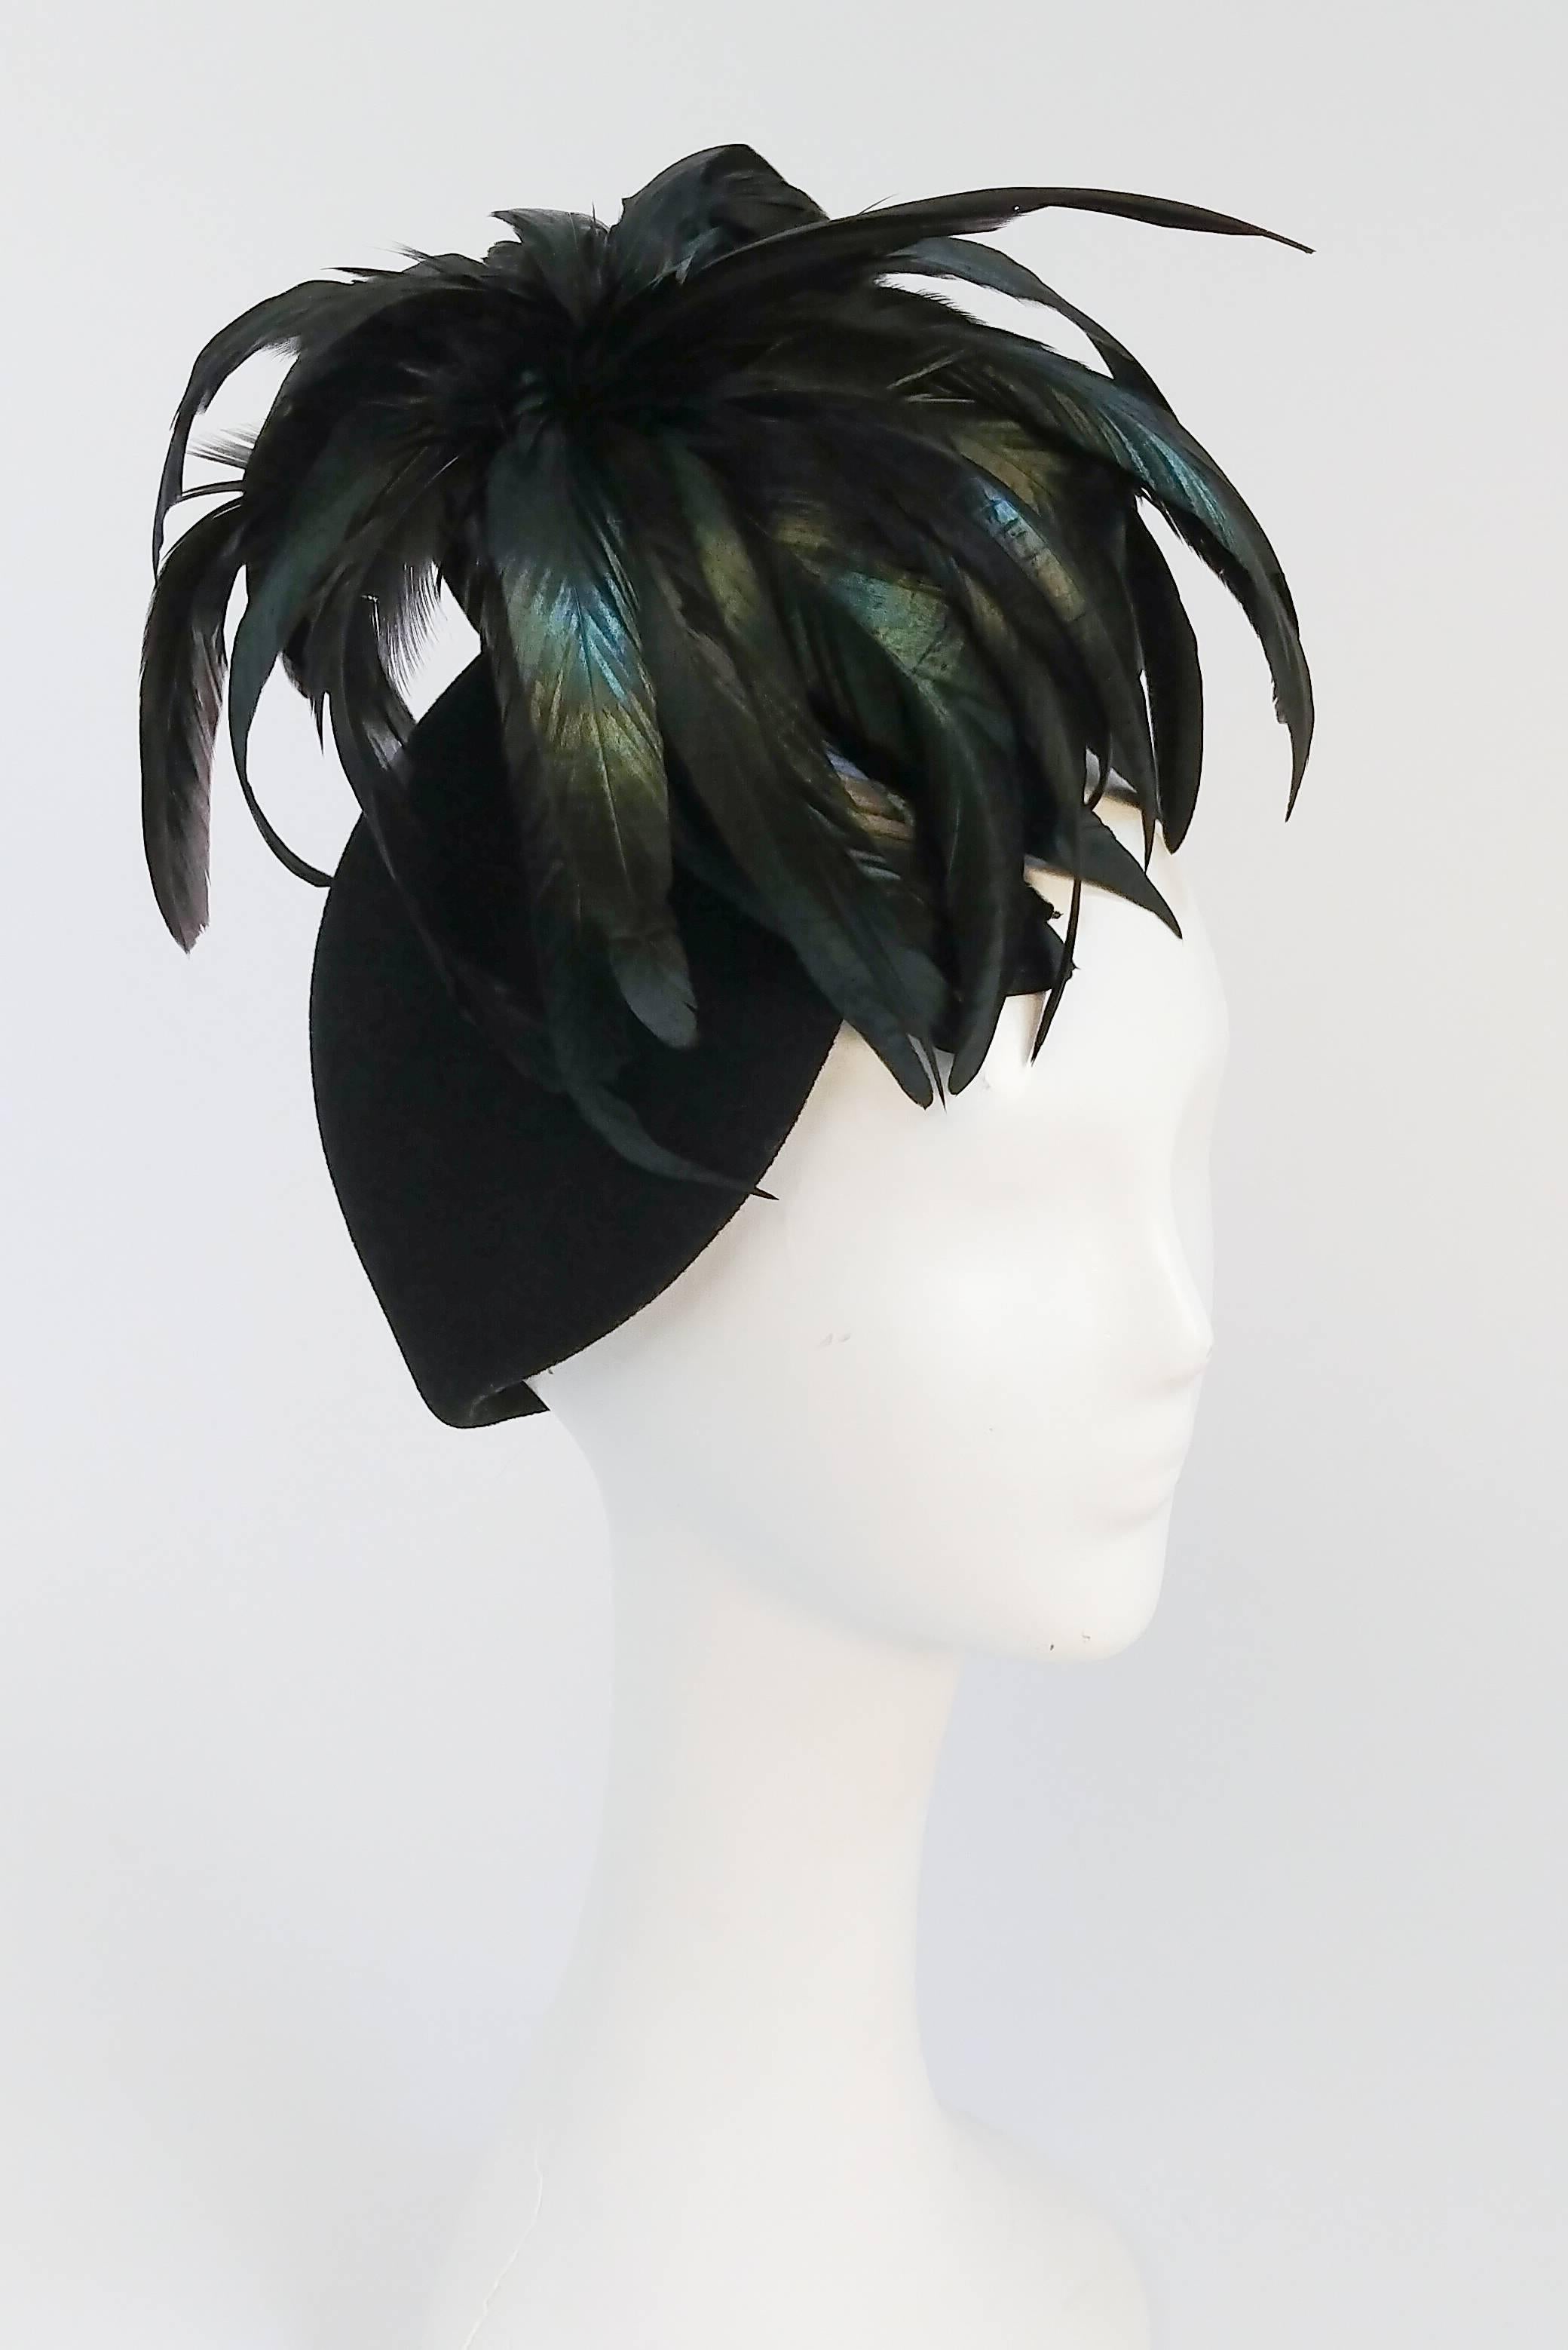 1980s Mr. John Rooster Feather Hat. A spray of feathers articulate this elegant black wool hat.